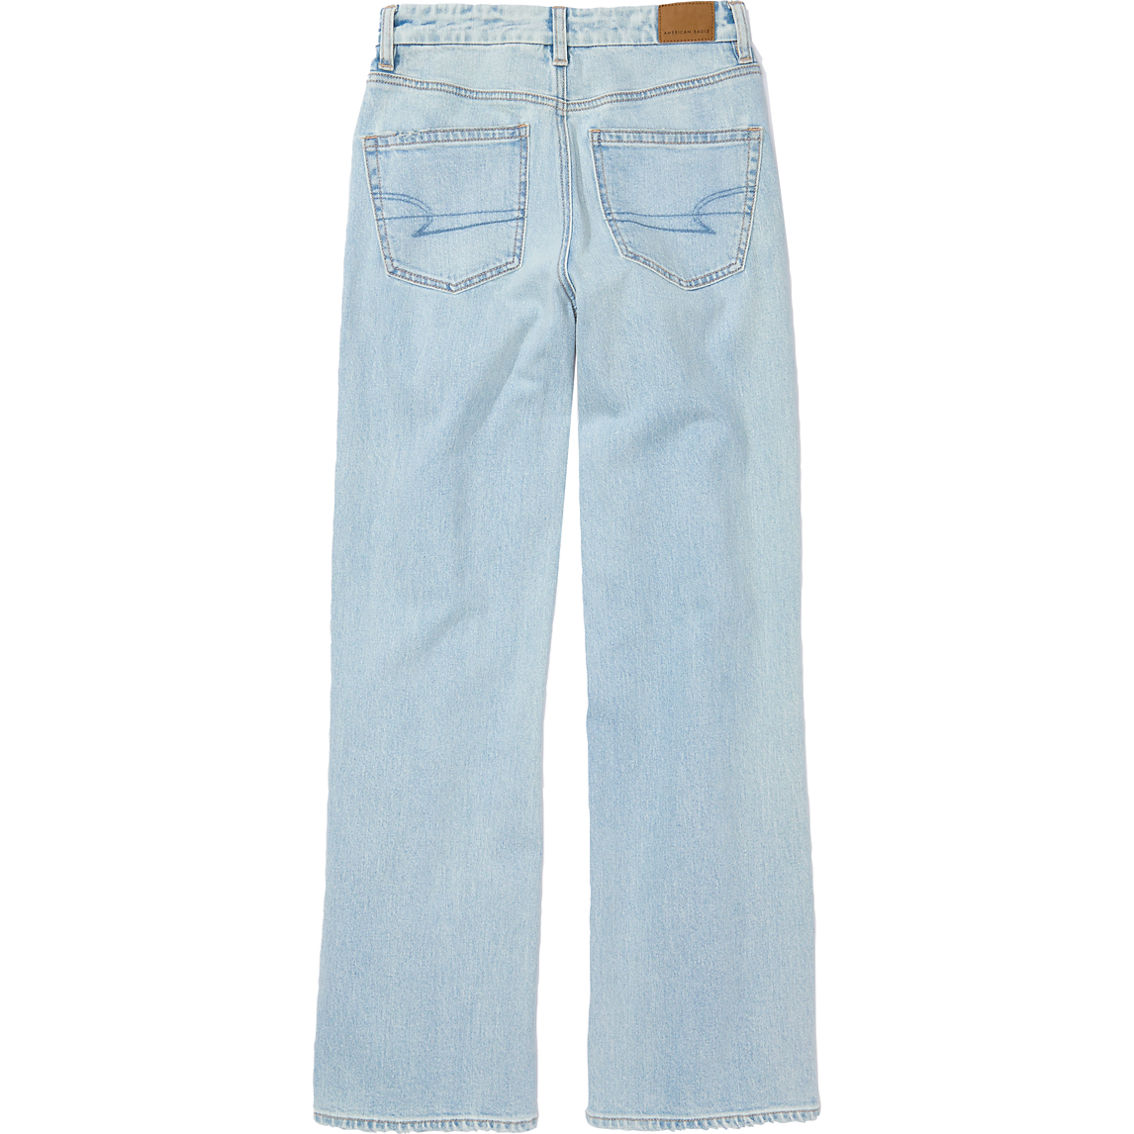 American Eagle Juniors Strigid Curvy Super High Waisted Ripped Baggy Straight Jeans - Image 2 of 2